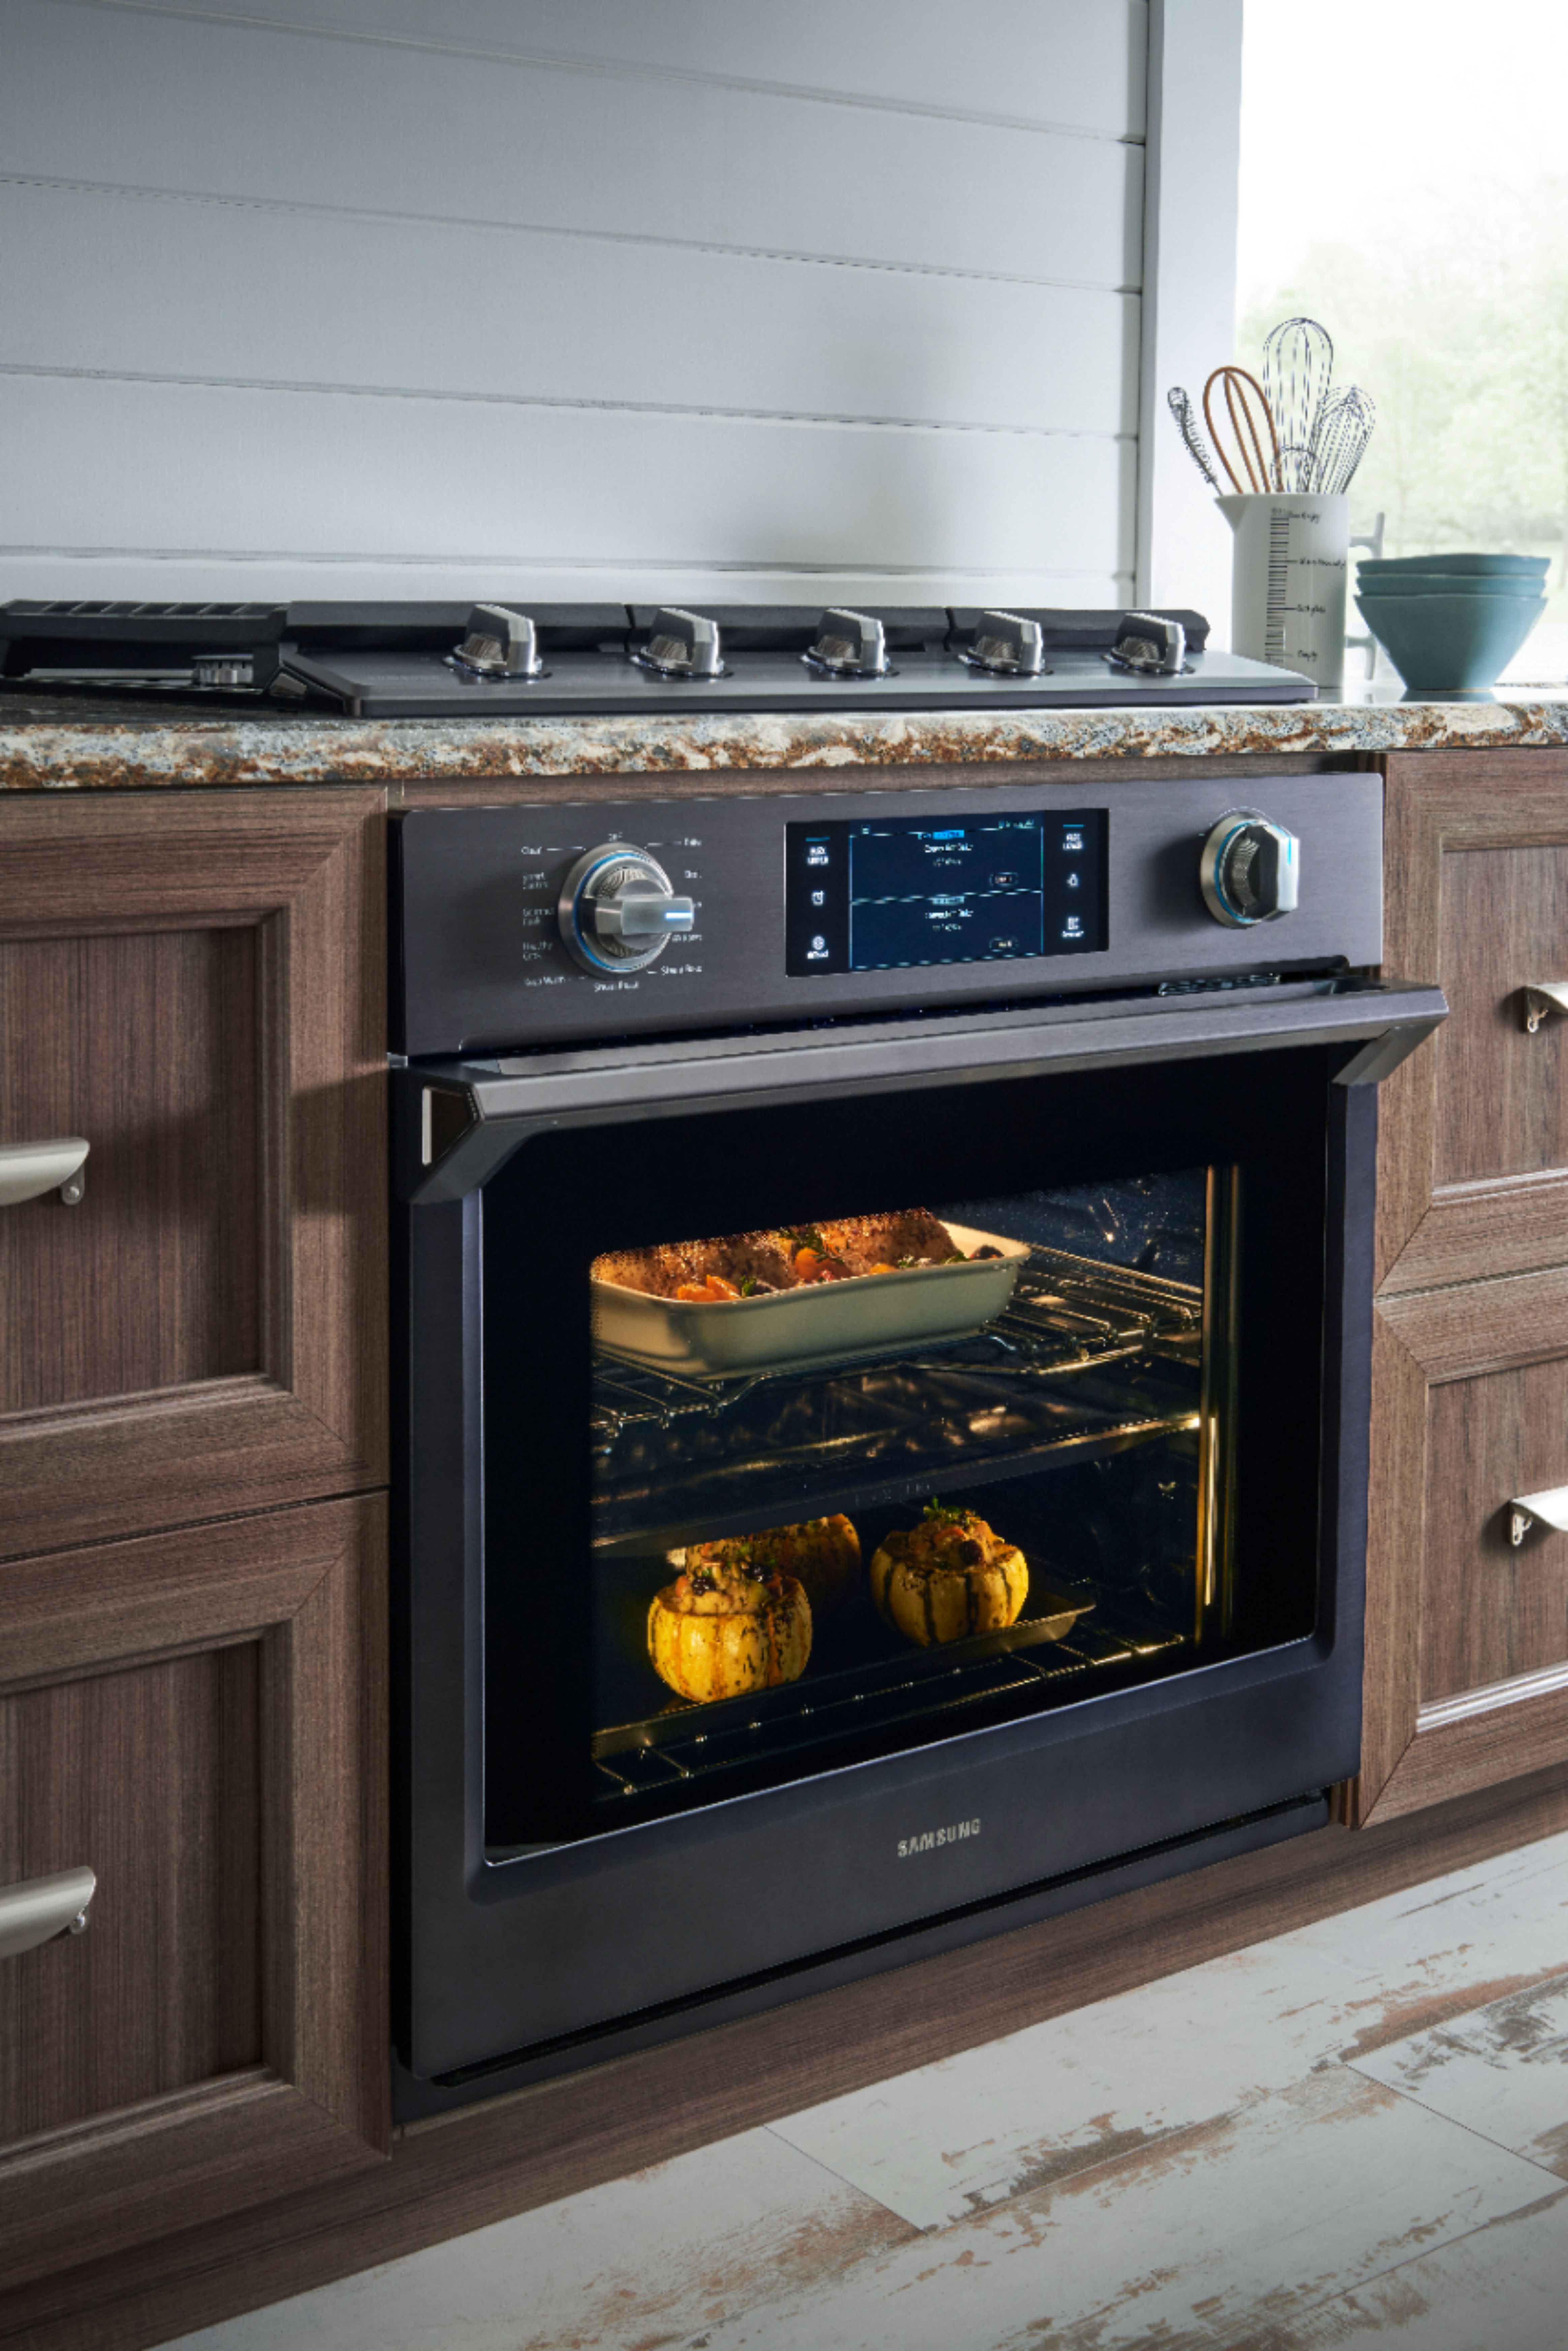 Samsung 30" Single Wall Oven with Flex Duo, Steam Cook and